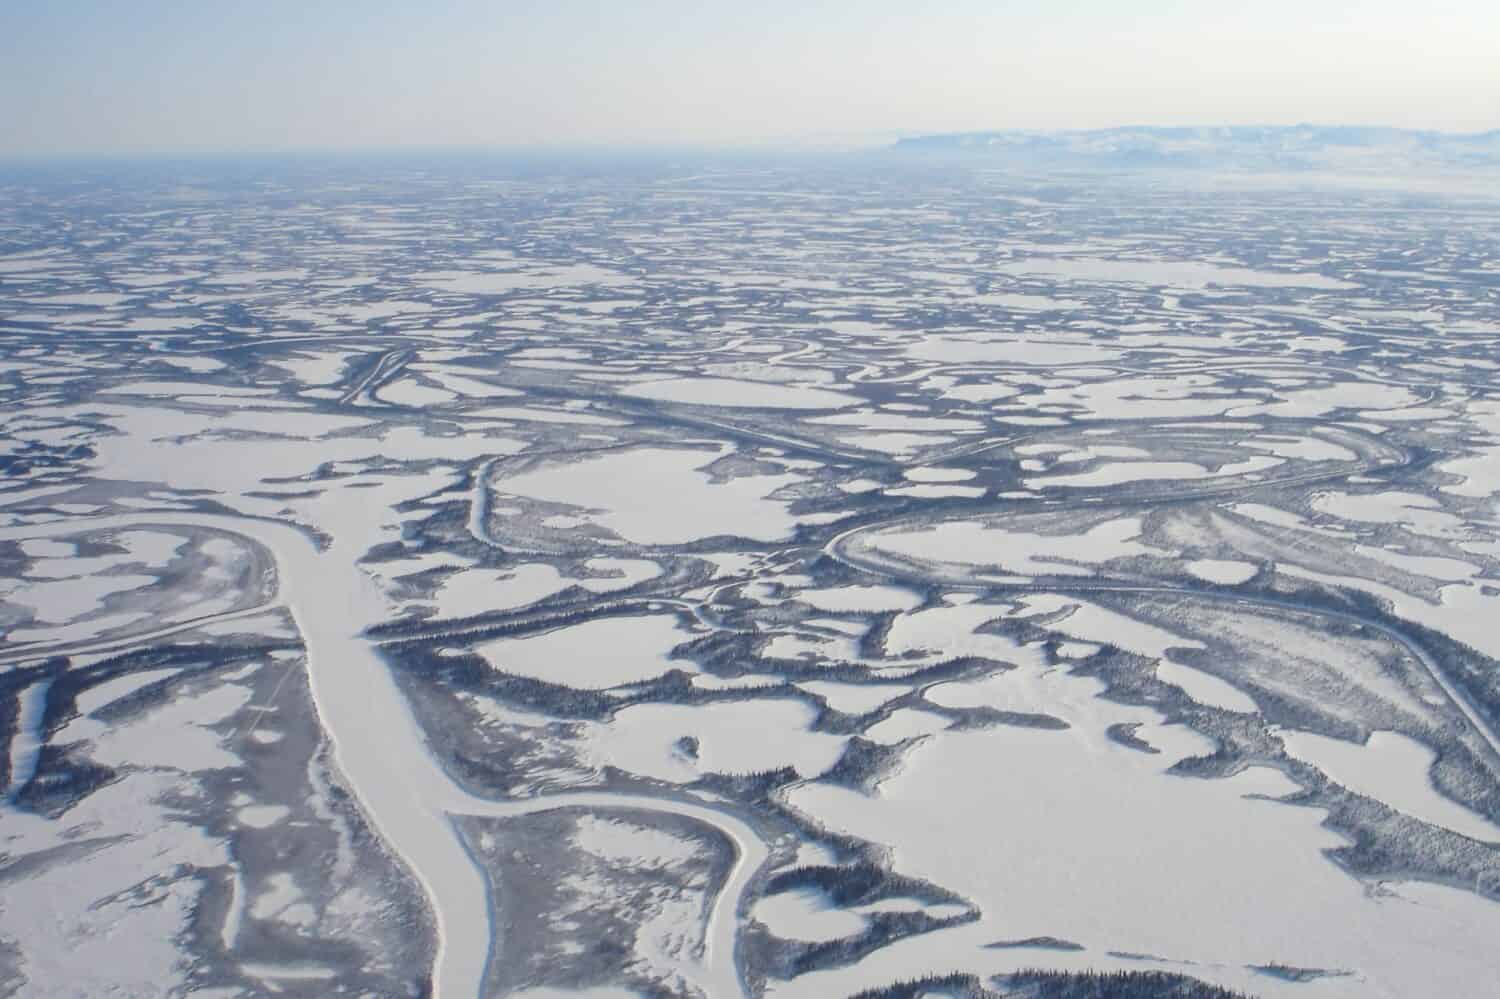 Aerial view of Canada's longest river, the Mackenzie River, empties into the Beaufort Sea, Arctic Ocean in a region known as the Mackenzie Delta. The Mackenzie Delta is the largest delta in Canada.